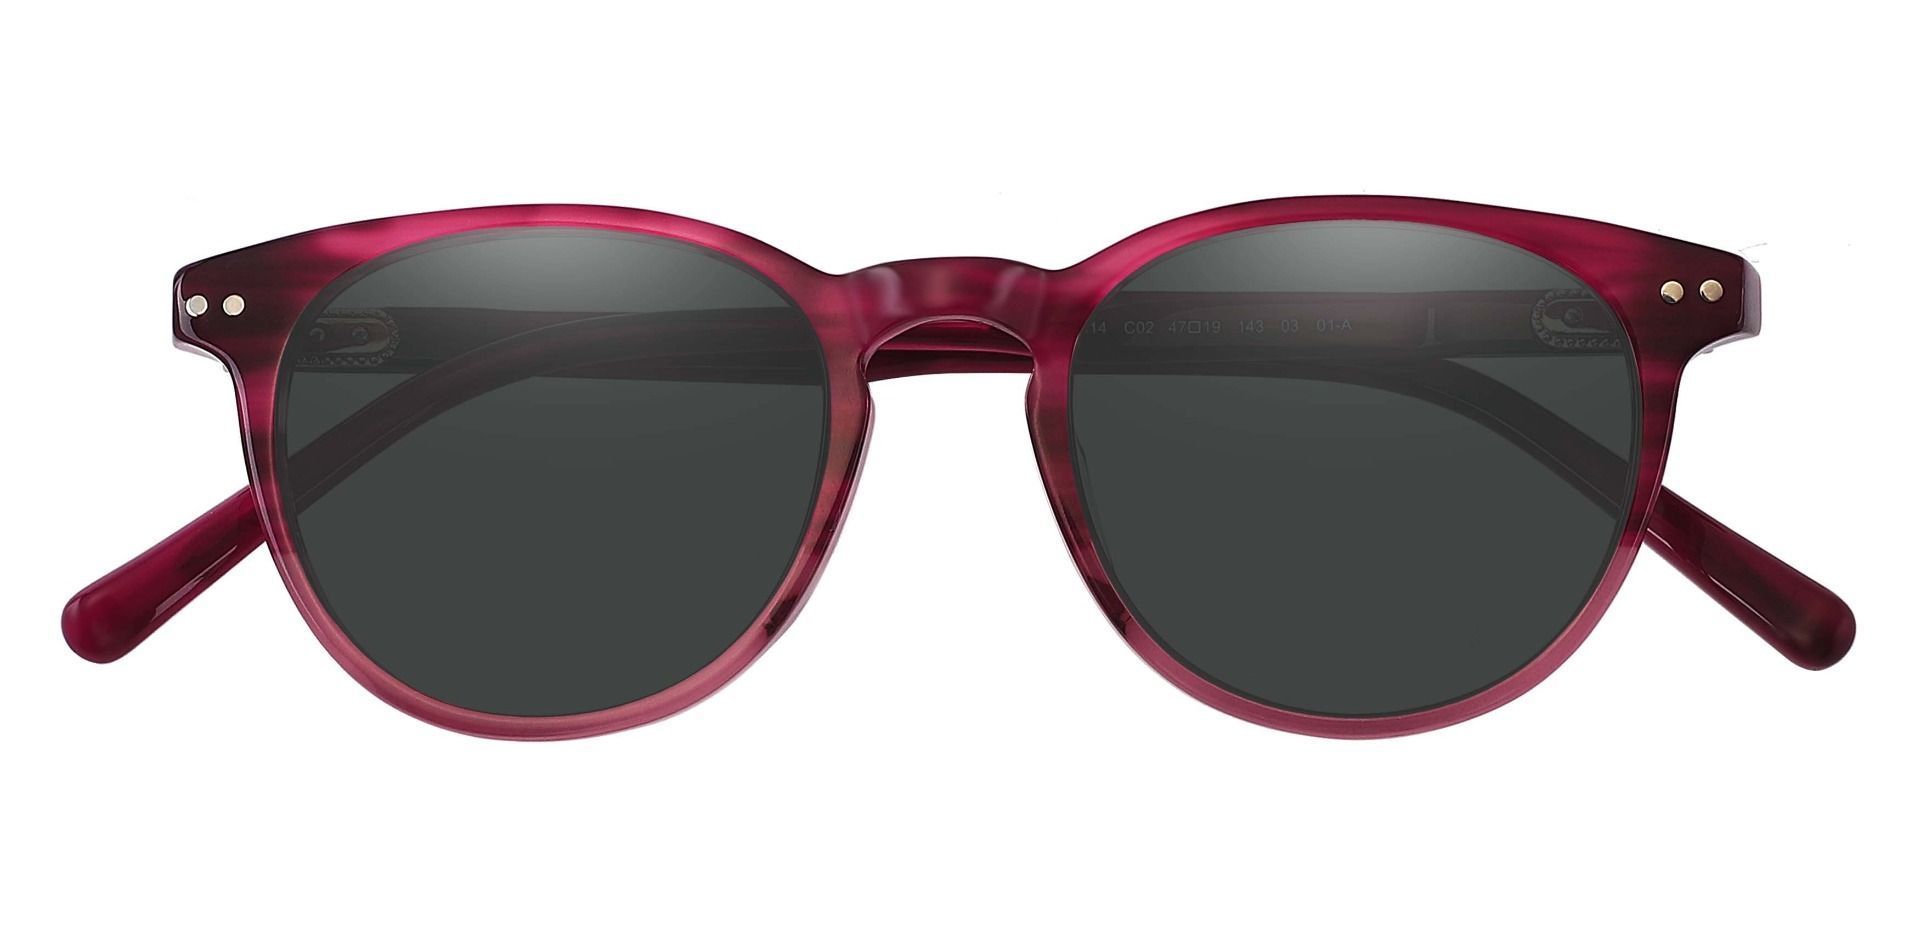 Marianna Oval Lined Bifocal Sunglasses - Red Frame With Gray Lenses